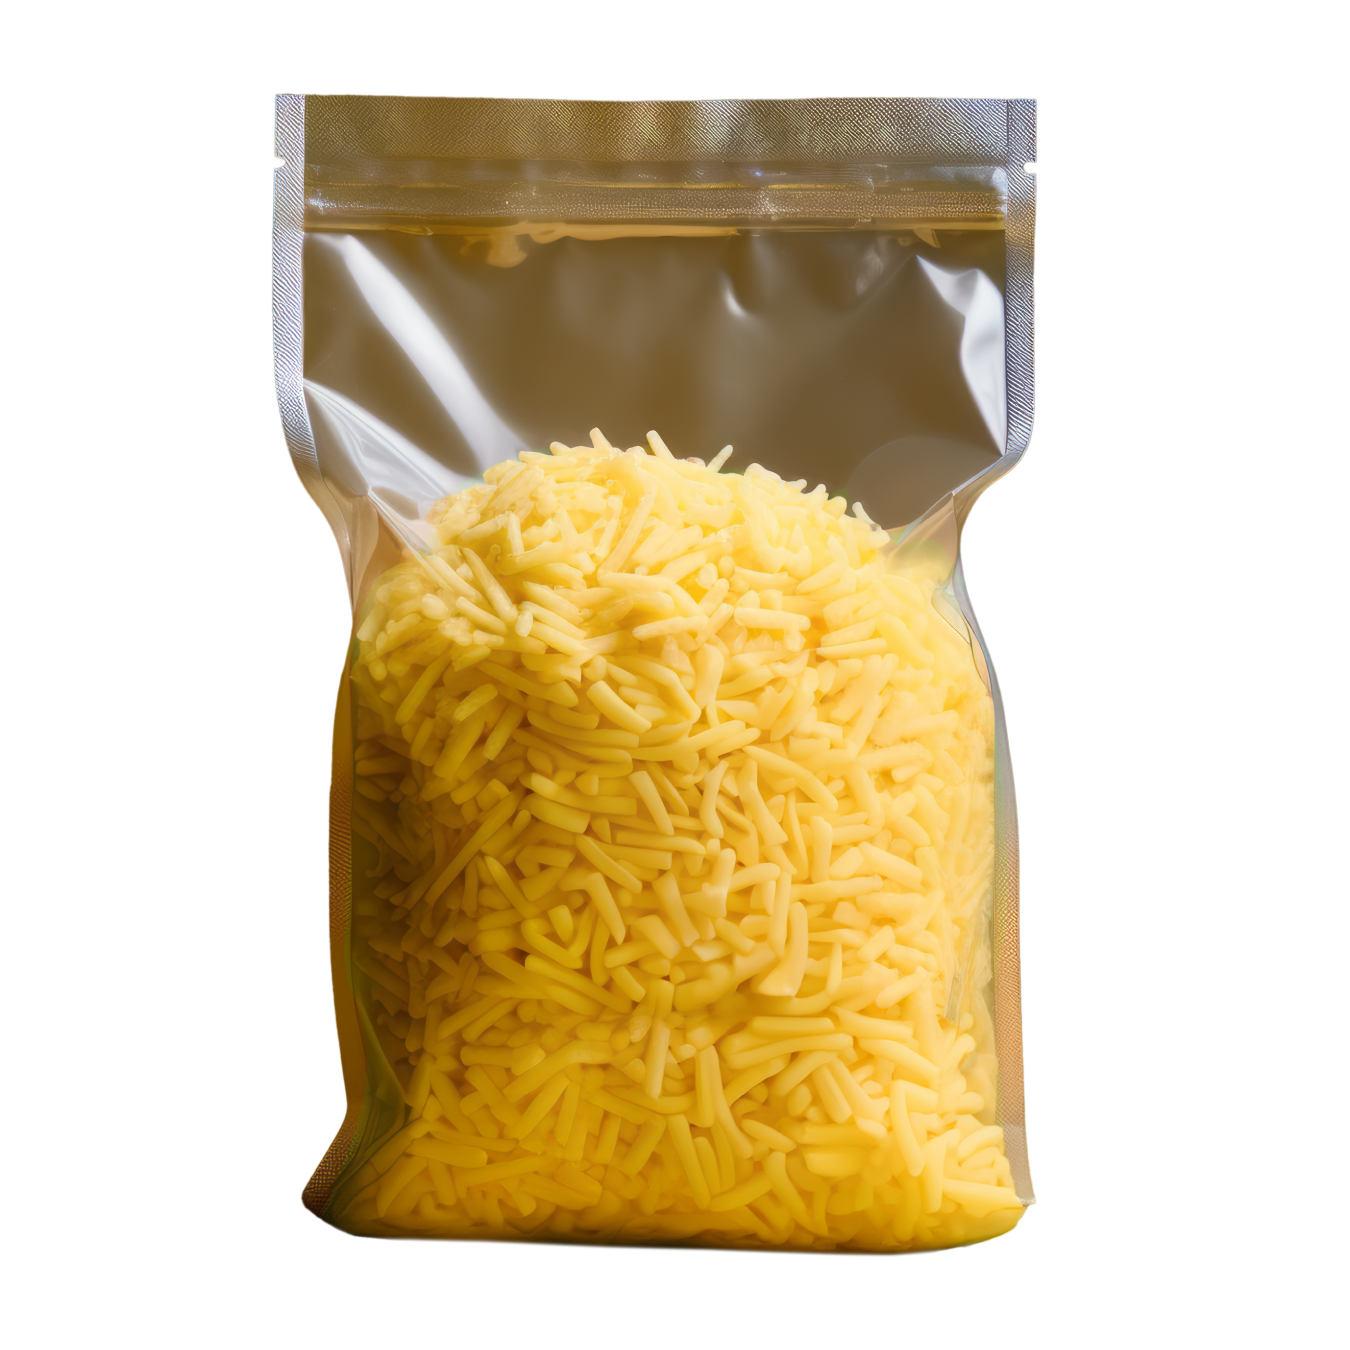 A Bag of Cheese